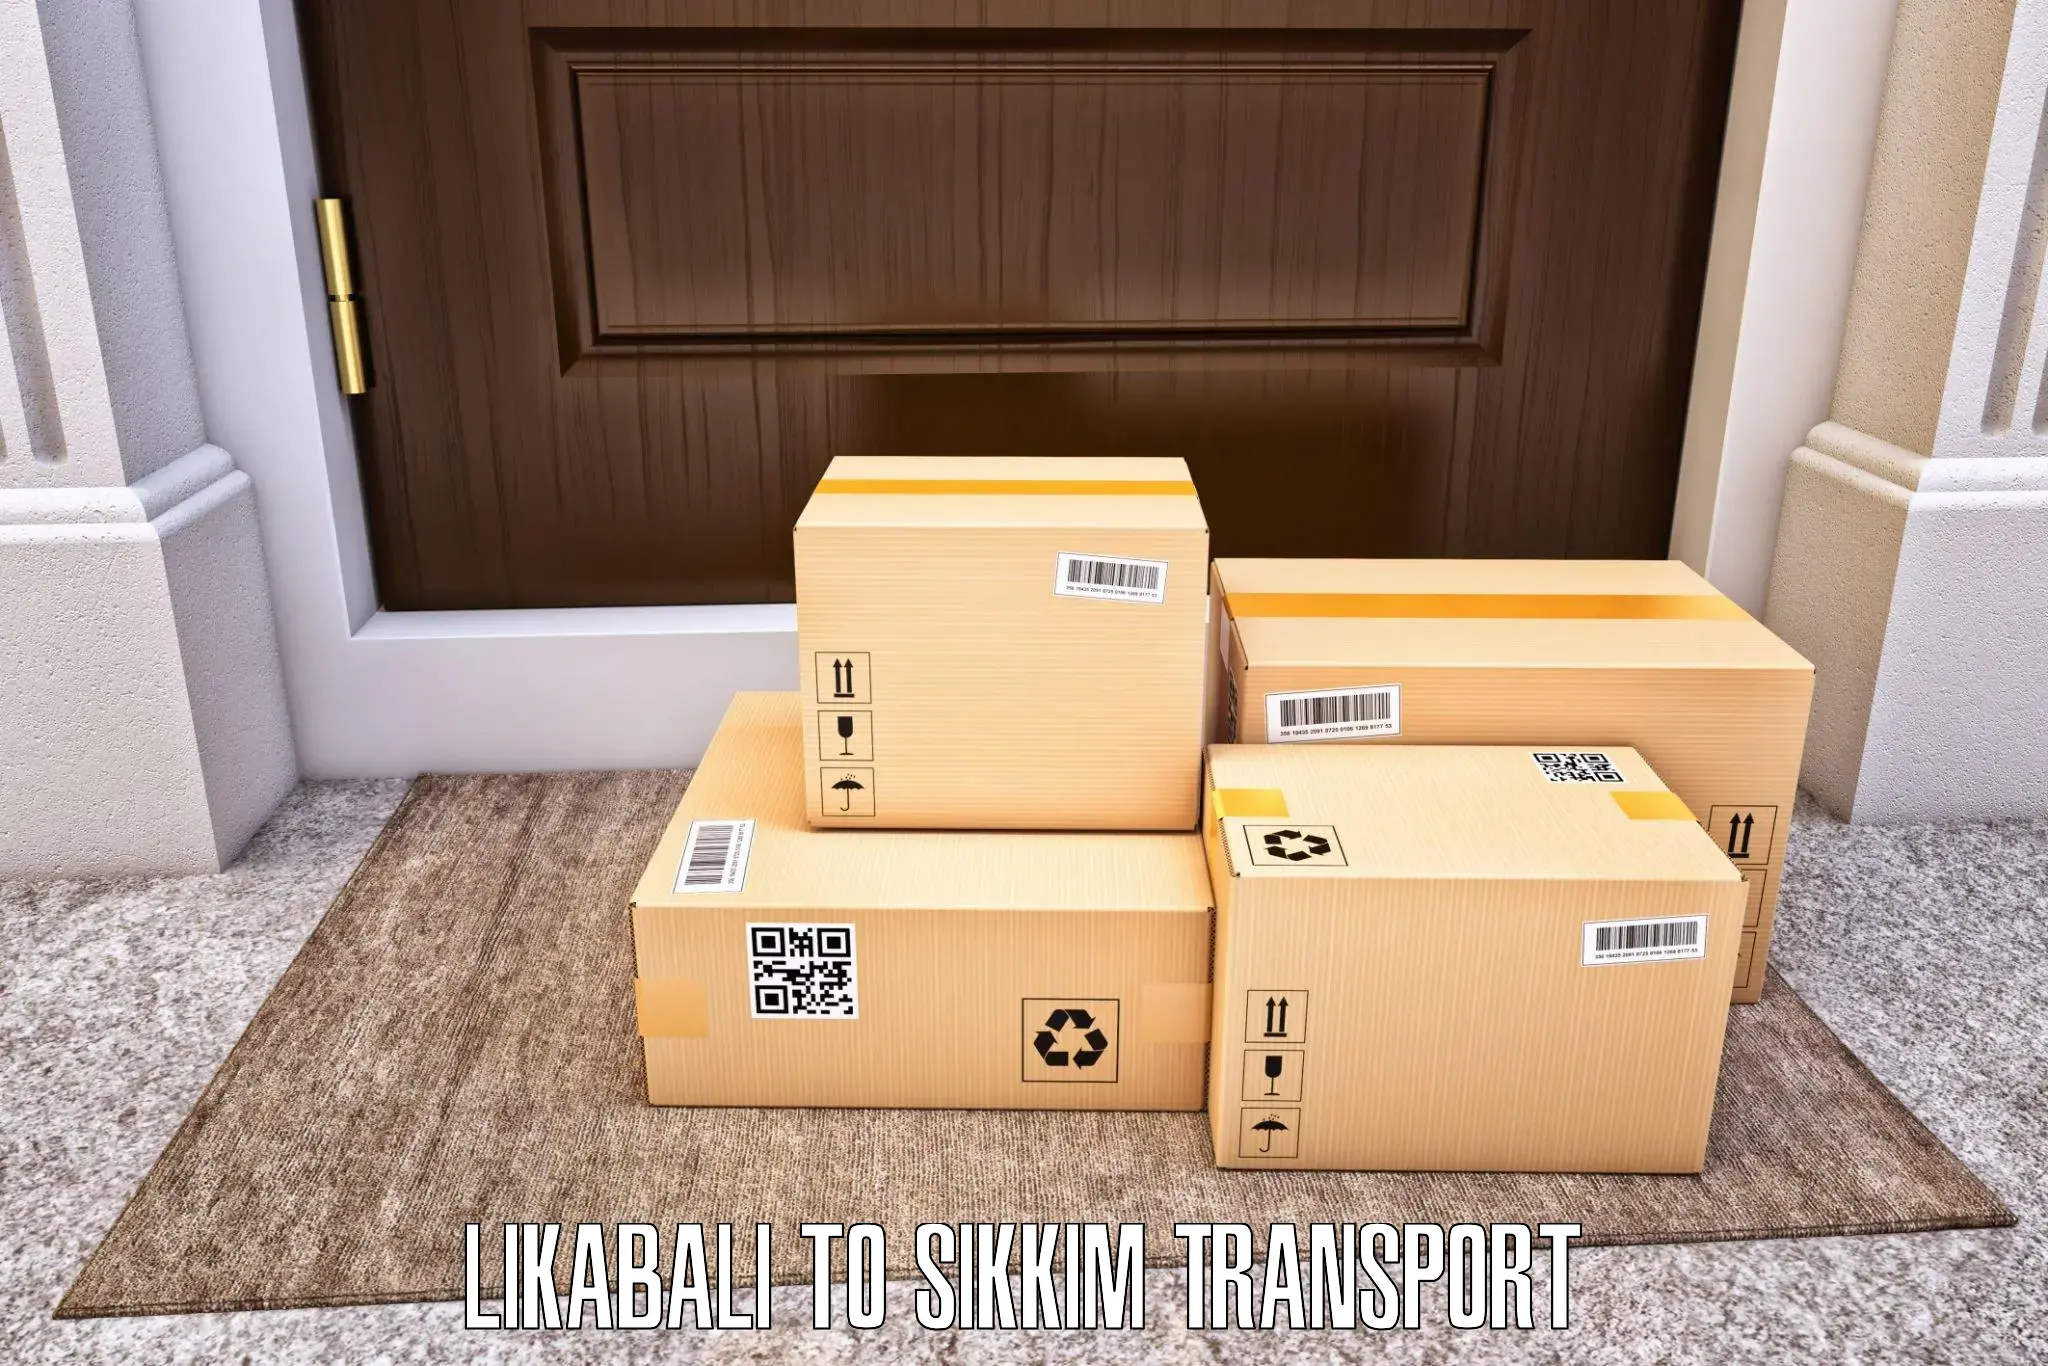 Domestic transport services Likabali to North Sikkim